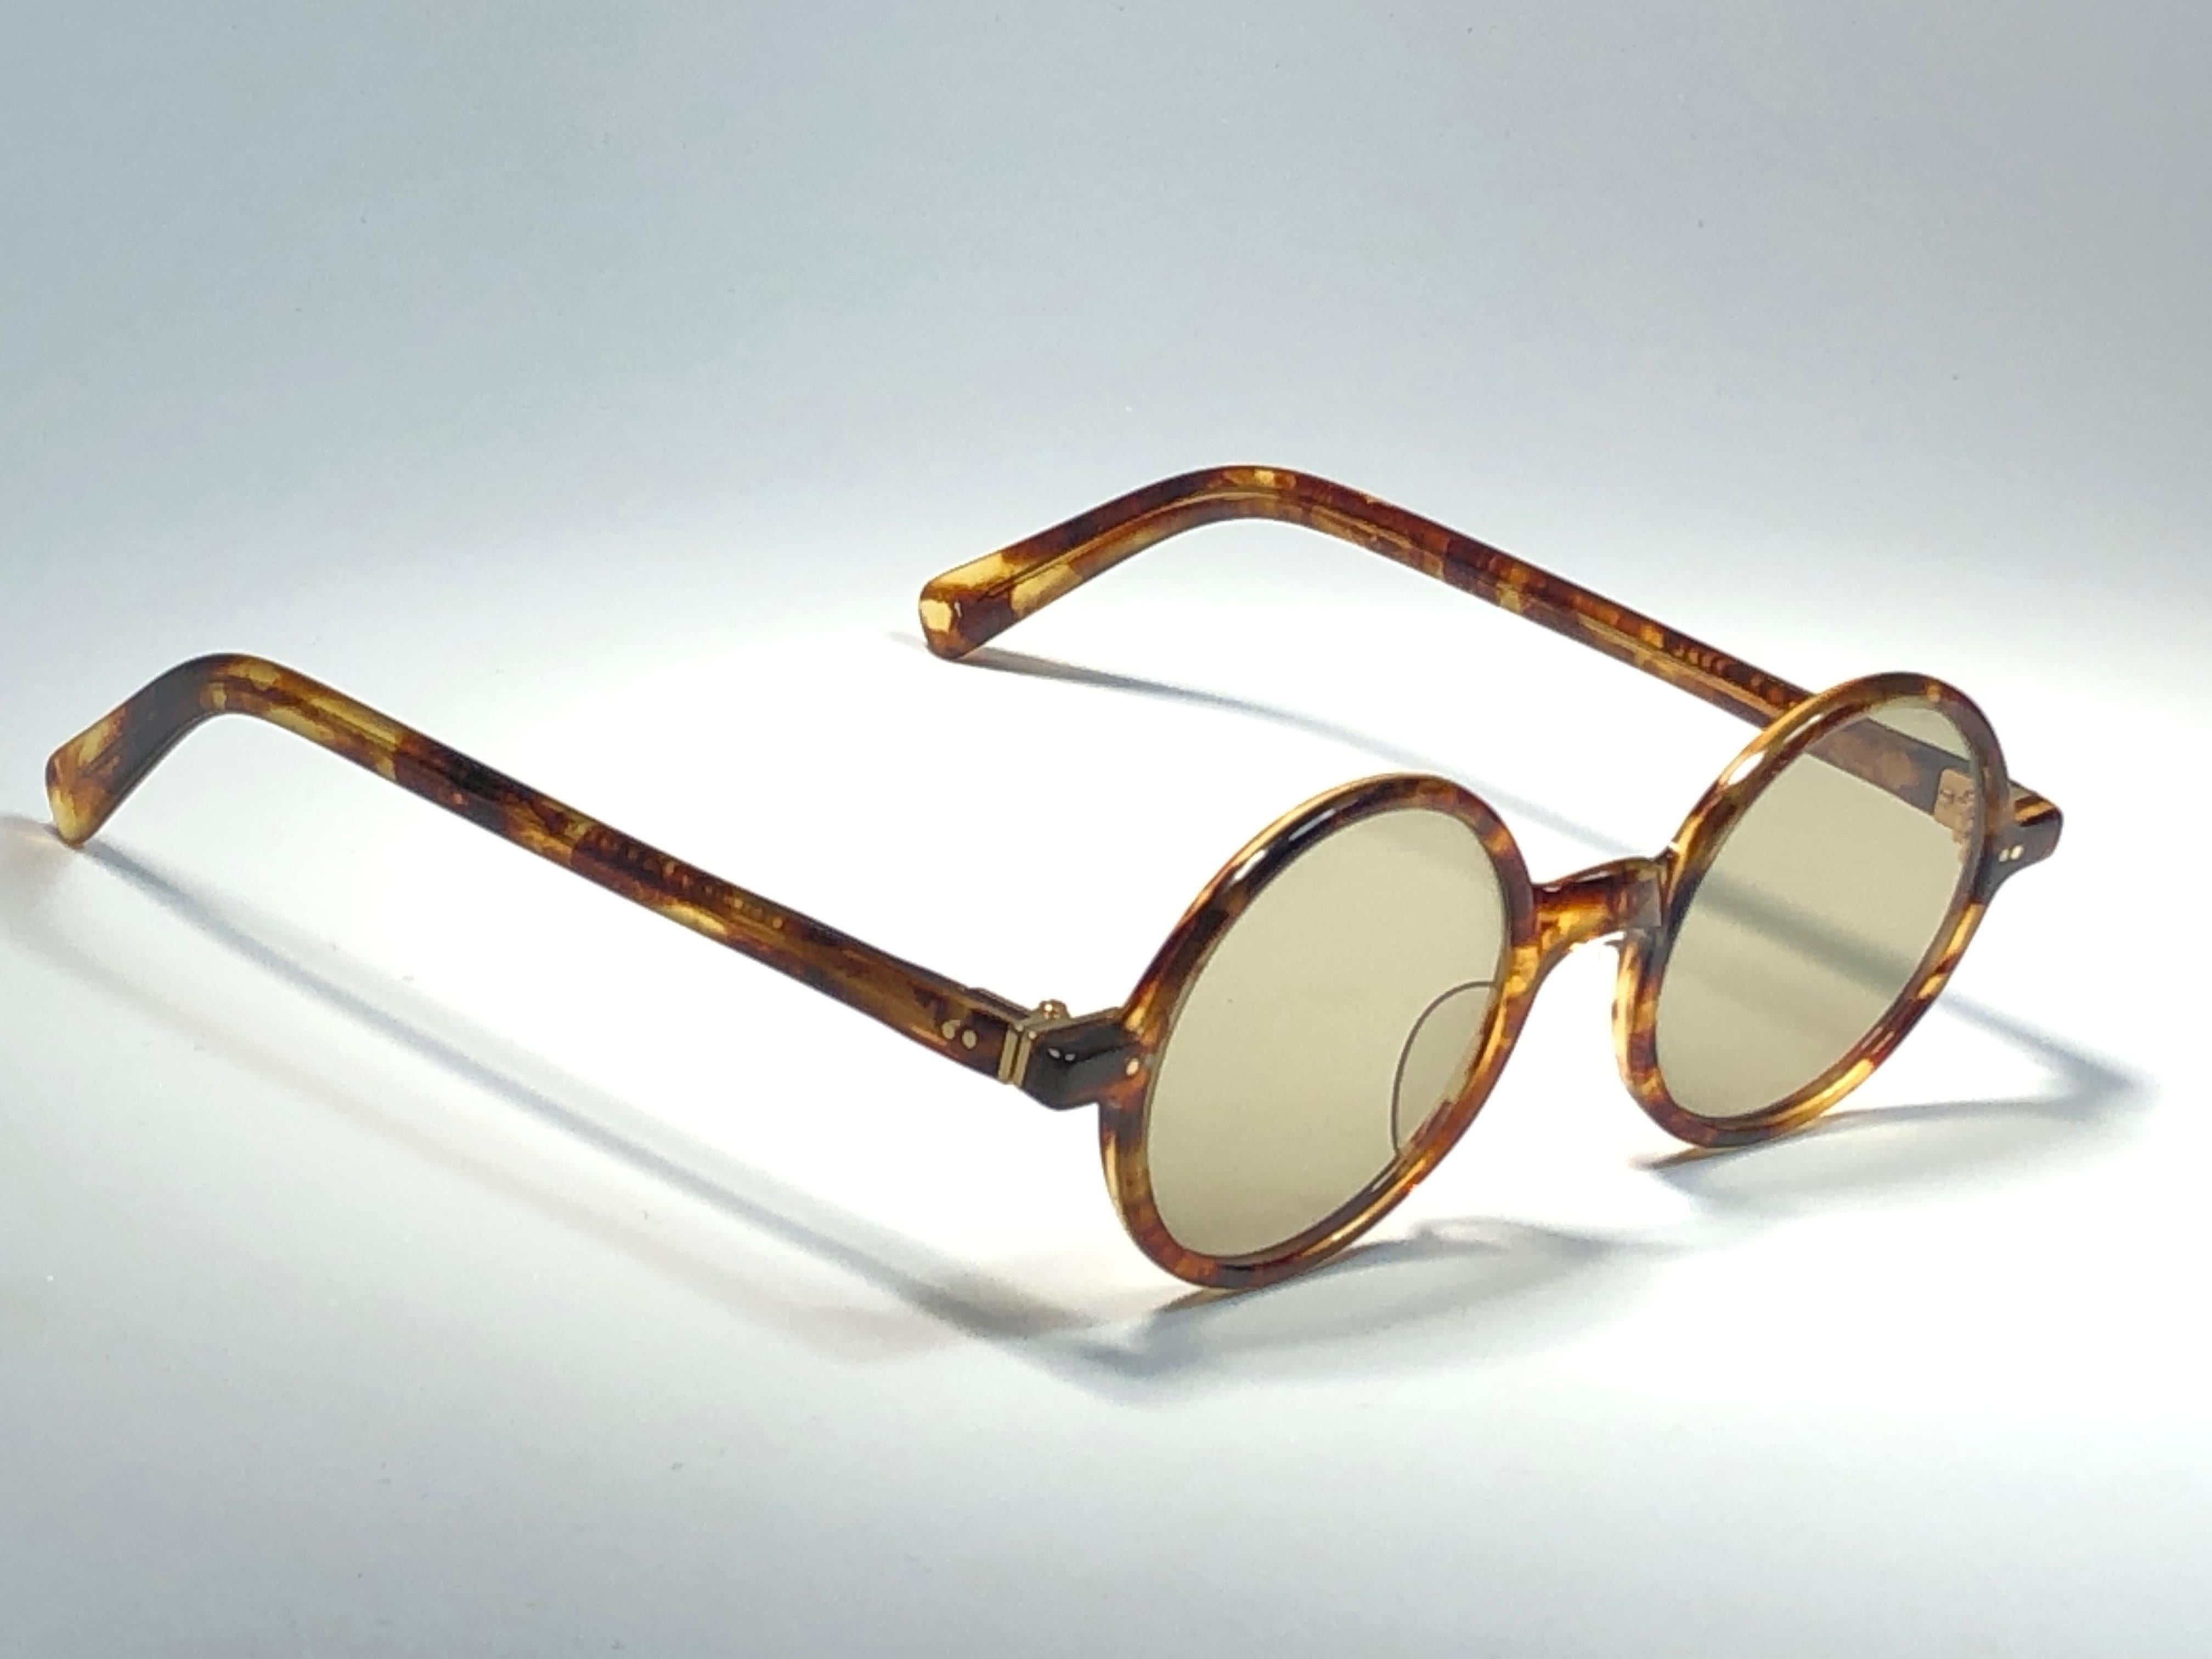 New Vintage Jean Paul Gaultier Junior 58 0072 XS Small frame in amber tortoise pattern.
Flat lenses for aa complete JPG look. 
The same model worn by Jean Reno in Luc Besson's, Leon The Professional.
Design and produced in the 1900's a timeless and